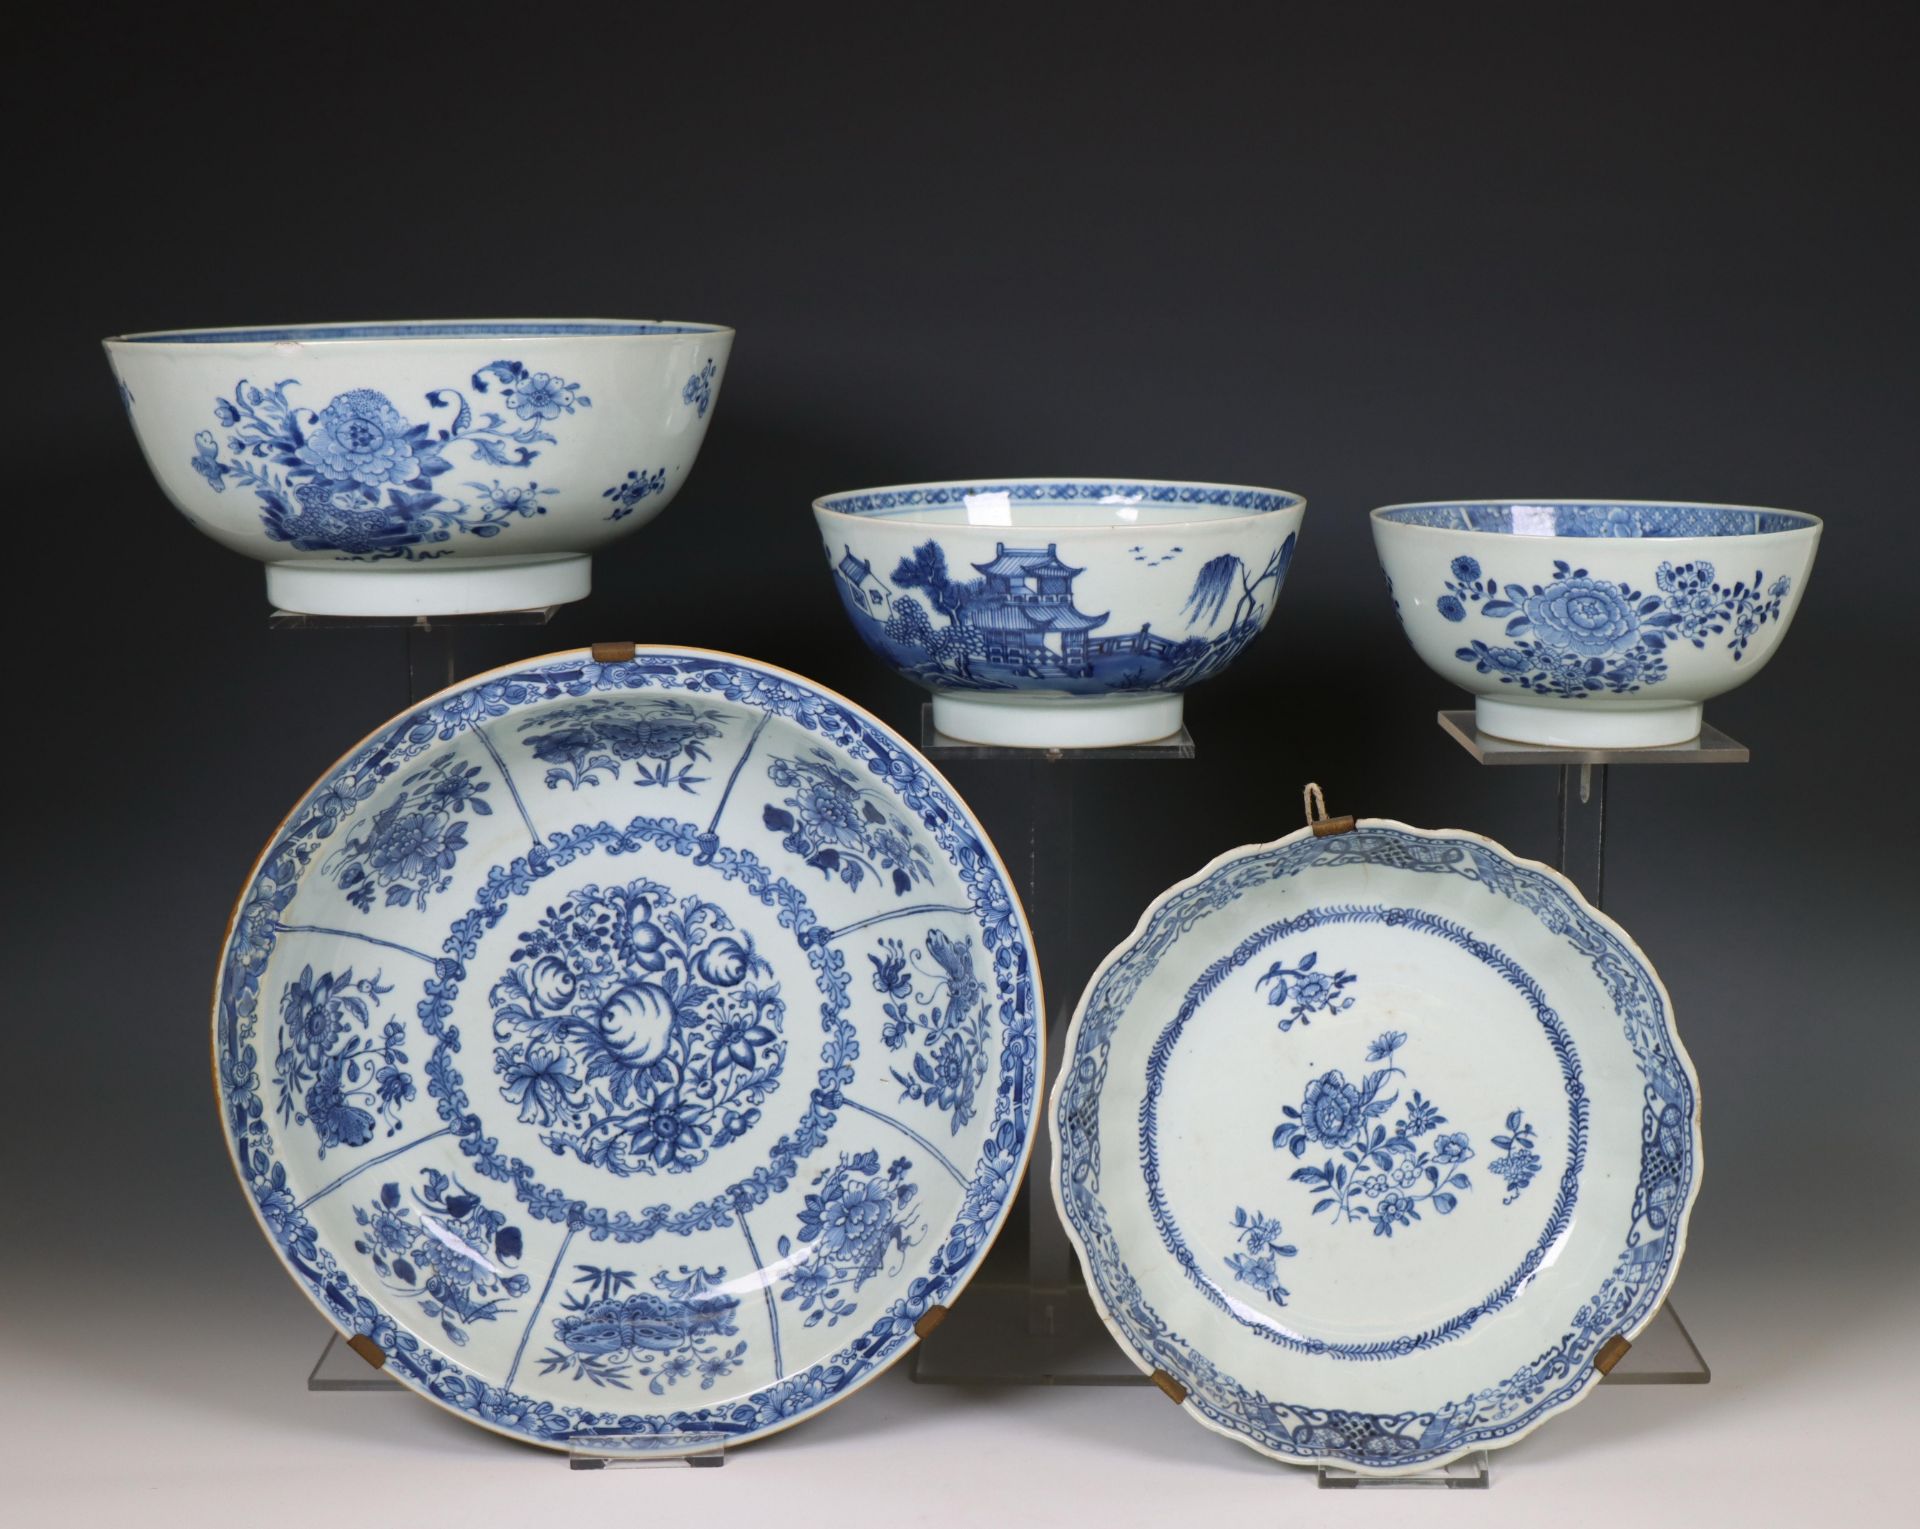 China, a collection of five blue and white porcelain bowls, Qianlong period (1736-1795),